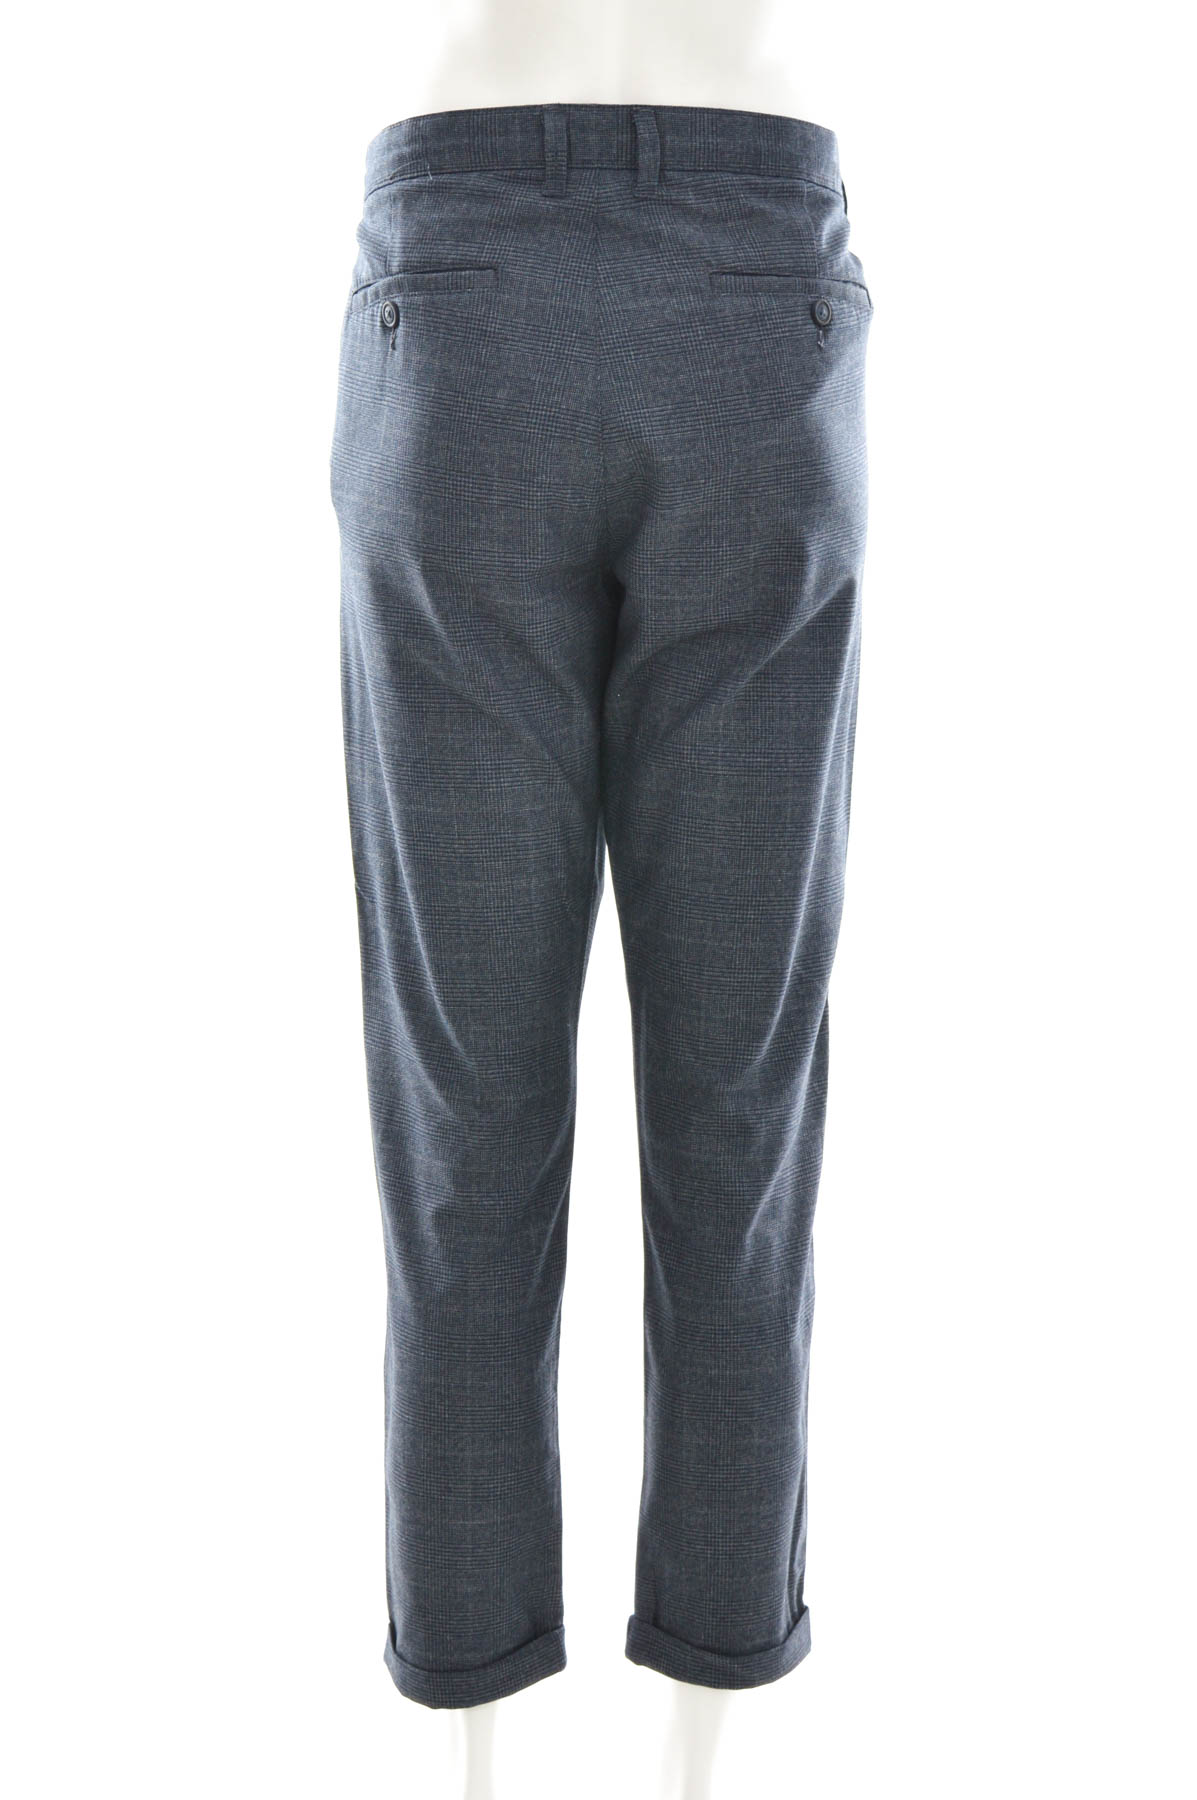 Men's trousers - LCW VISION - 1